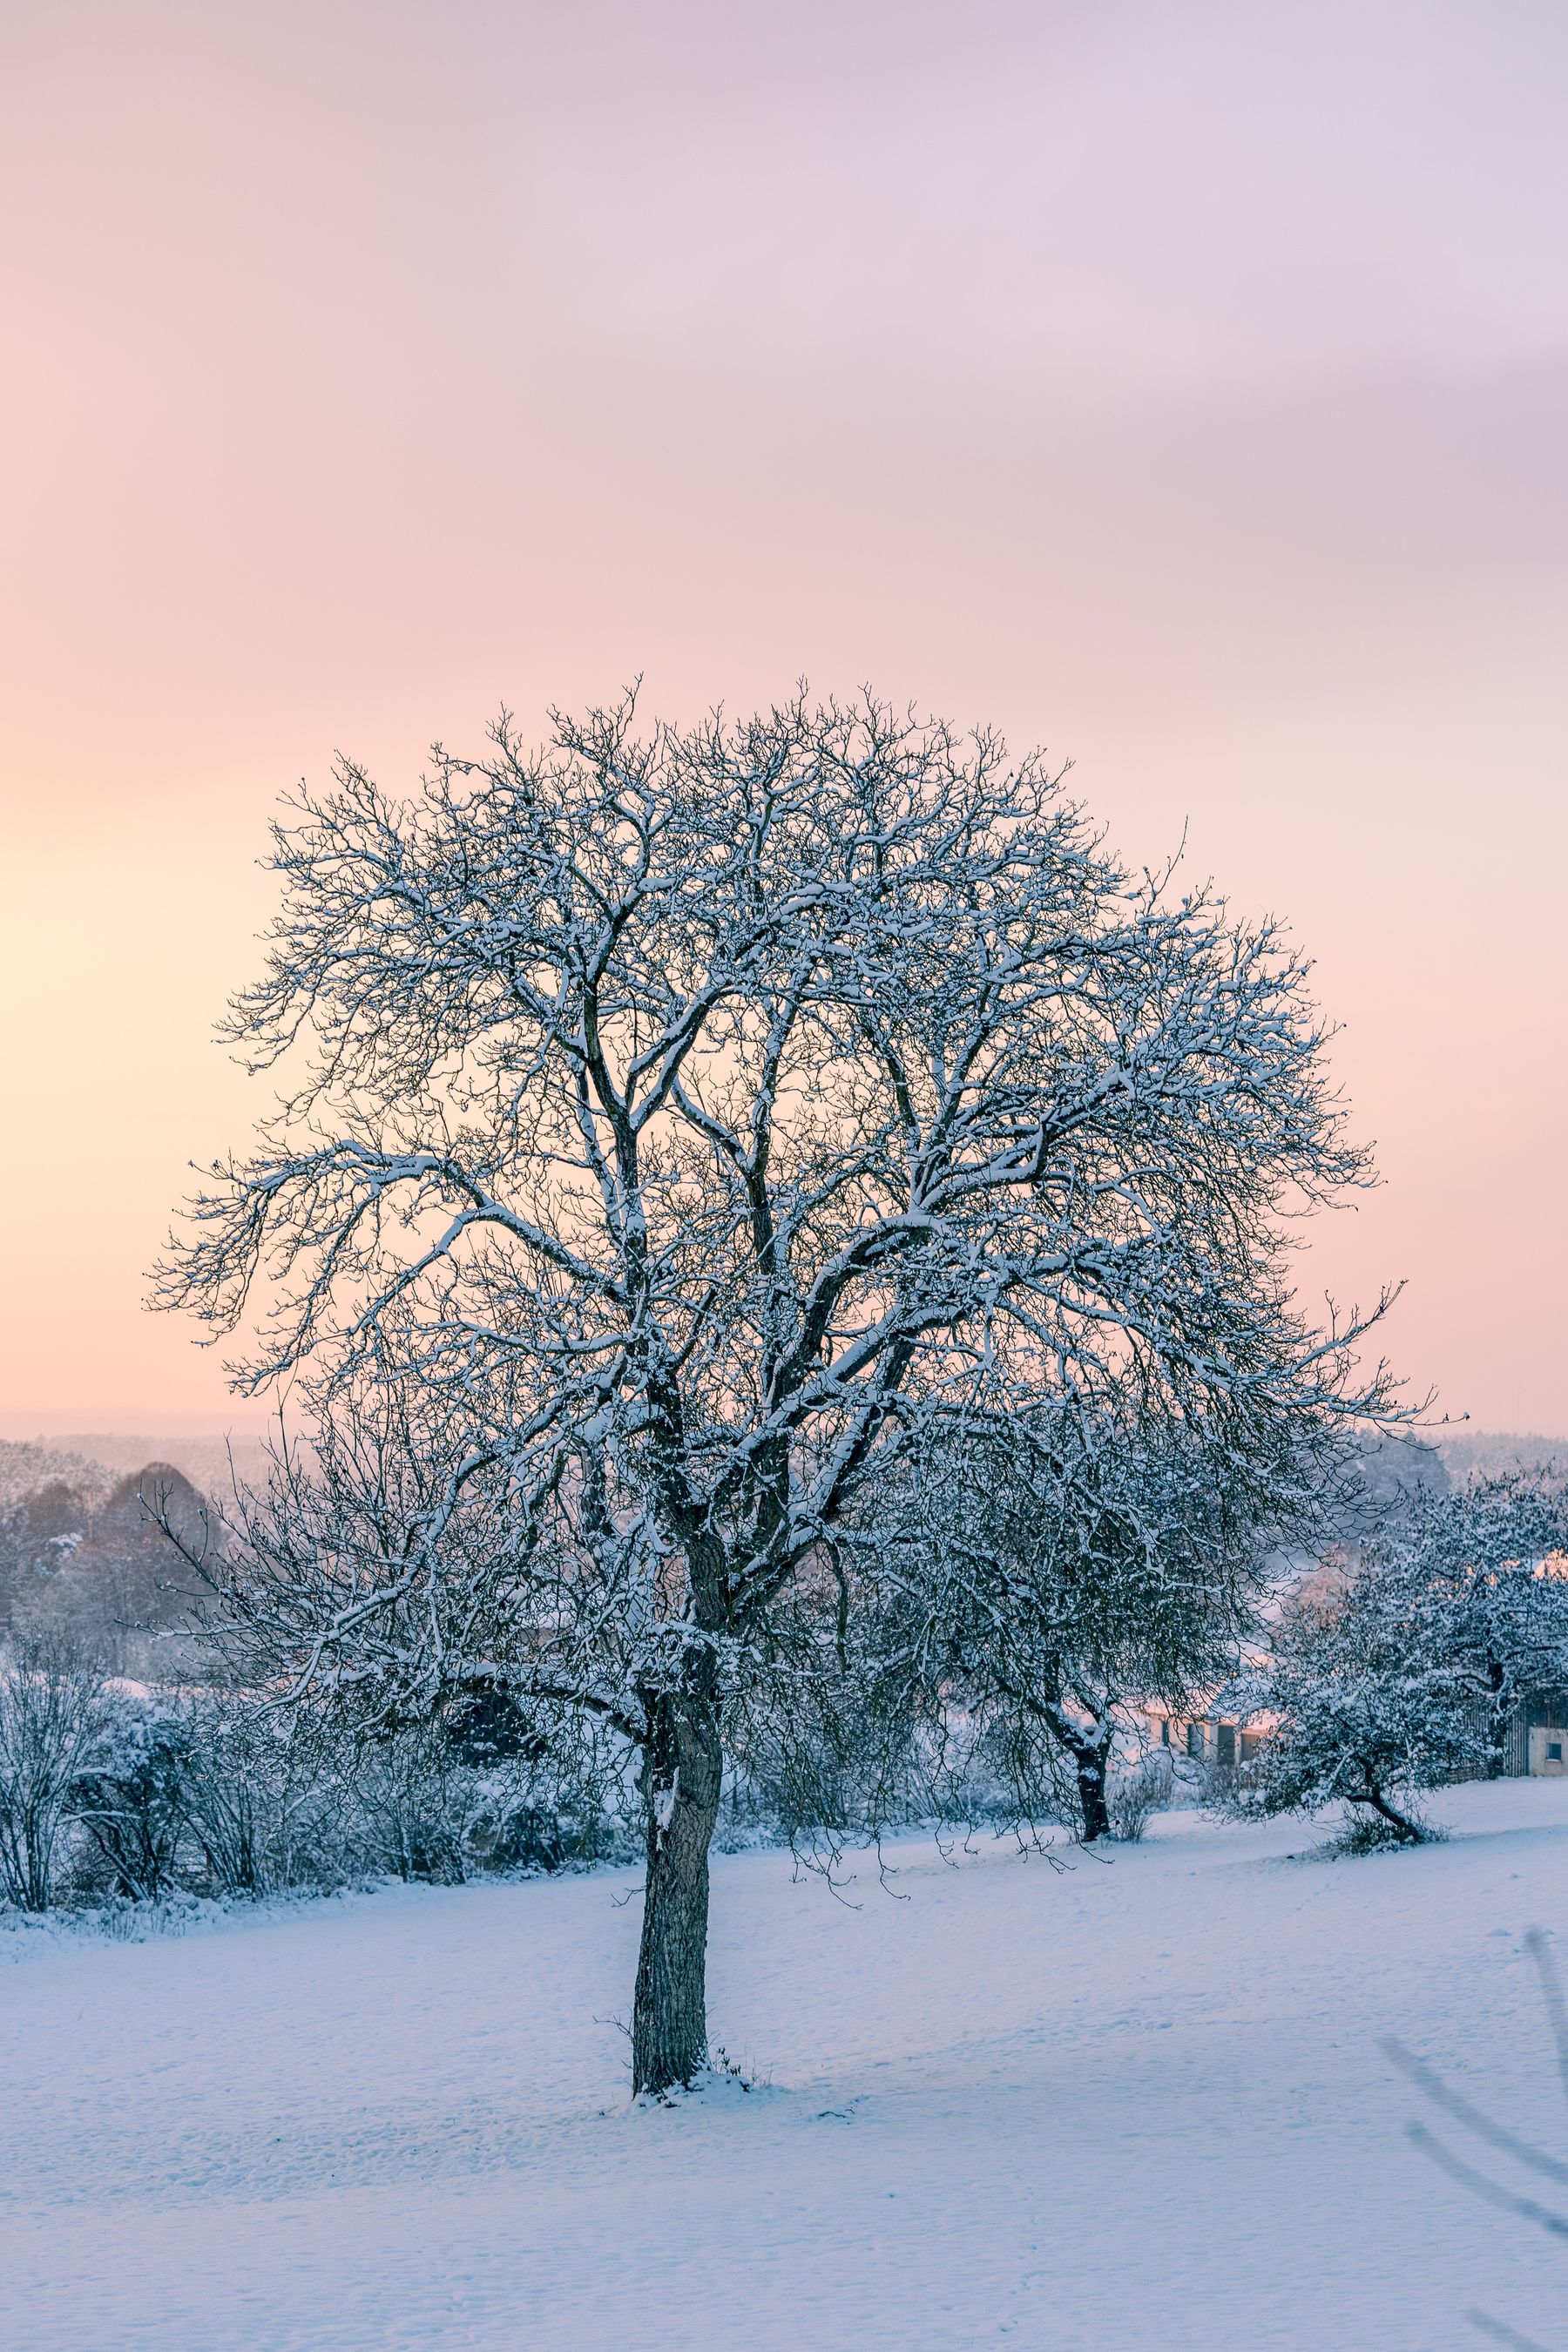 A solitary leafless tree stands in a snow-covered landscape under a softly hued dawn or dusk sky with shades of pink and blue. A dusting of snow rests on each branch, and the ground is blanketed in undisturbed white snow, the scene conveying a quiet and serene winter moment.